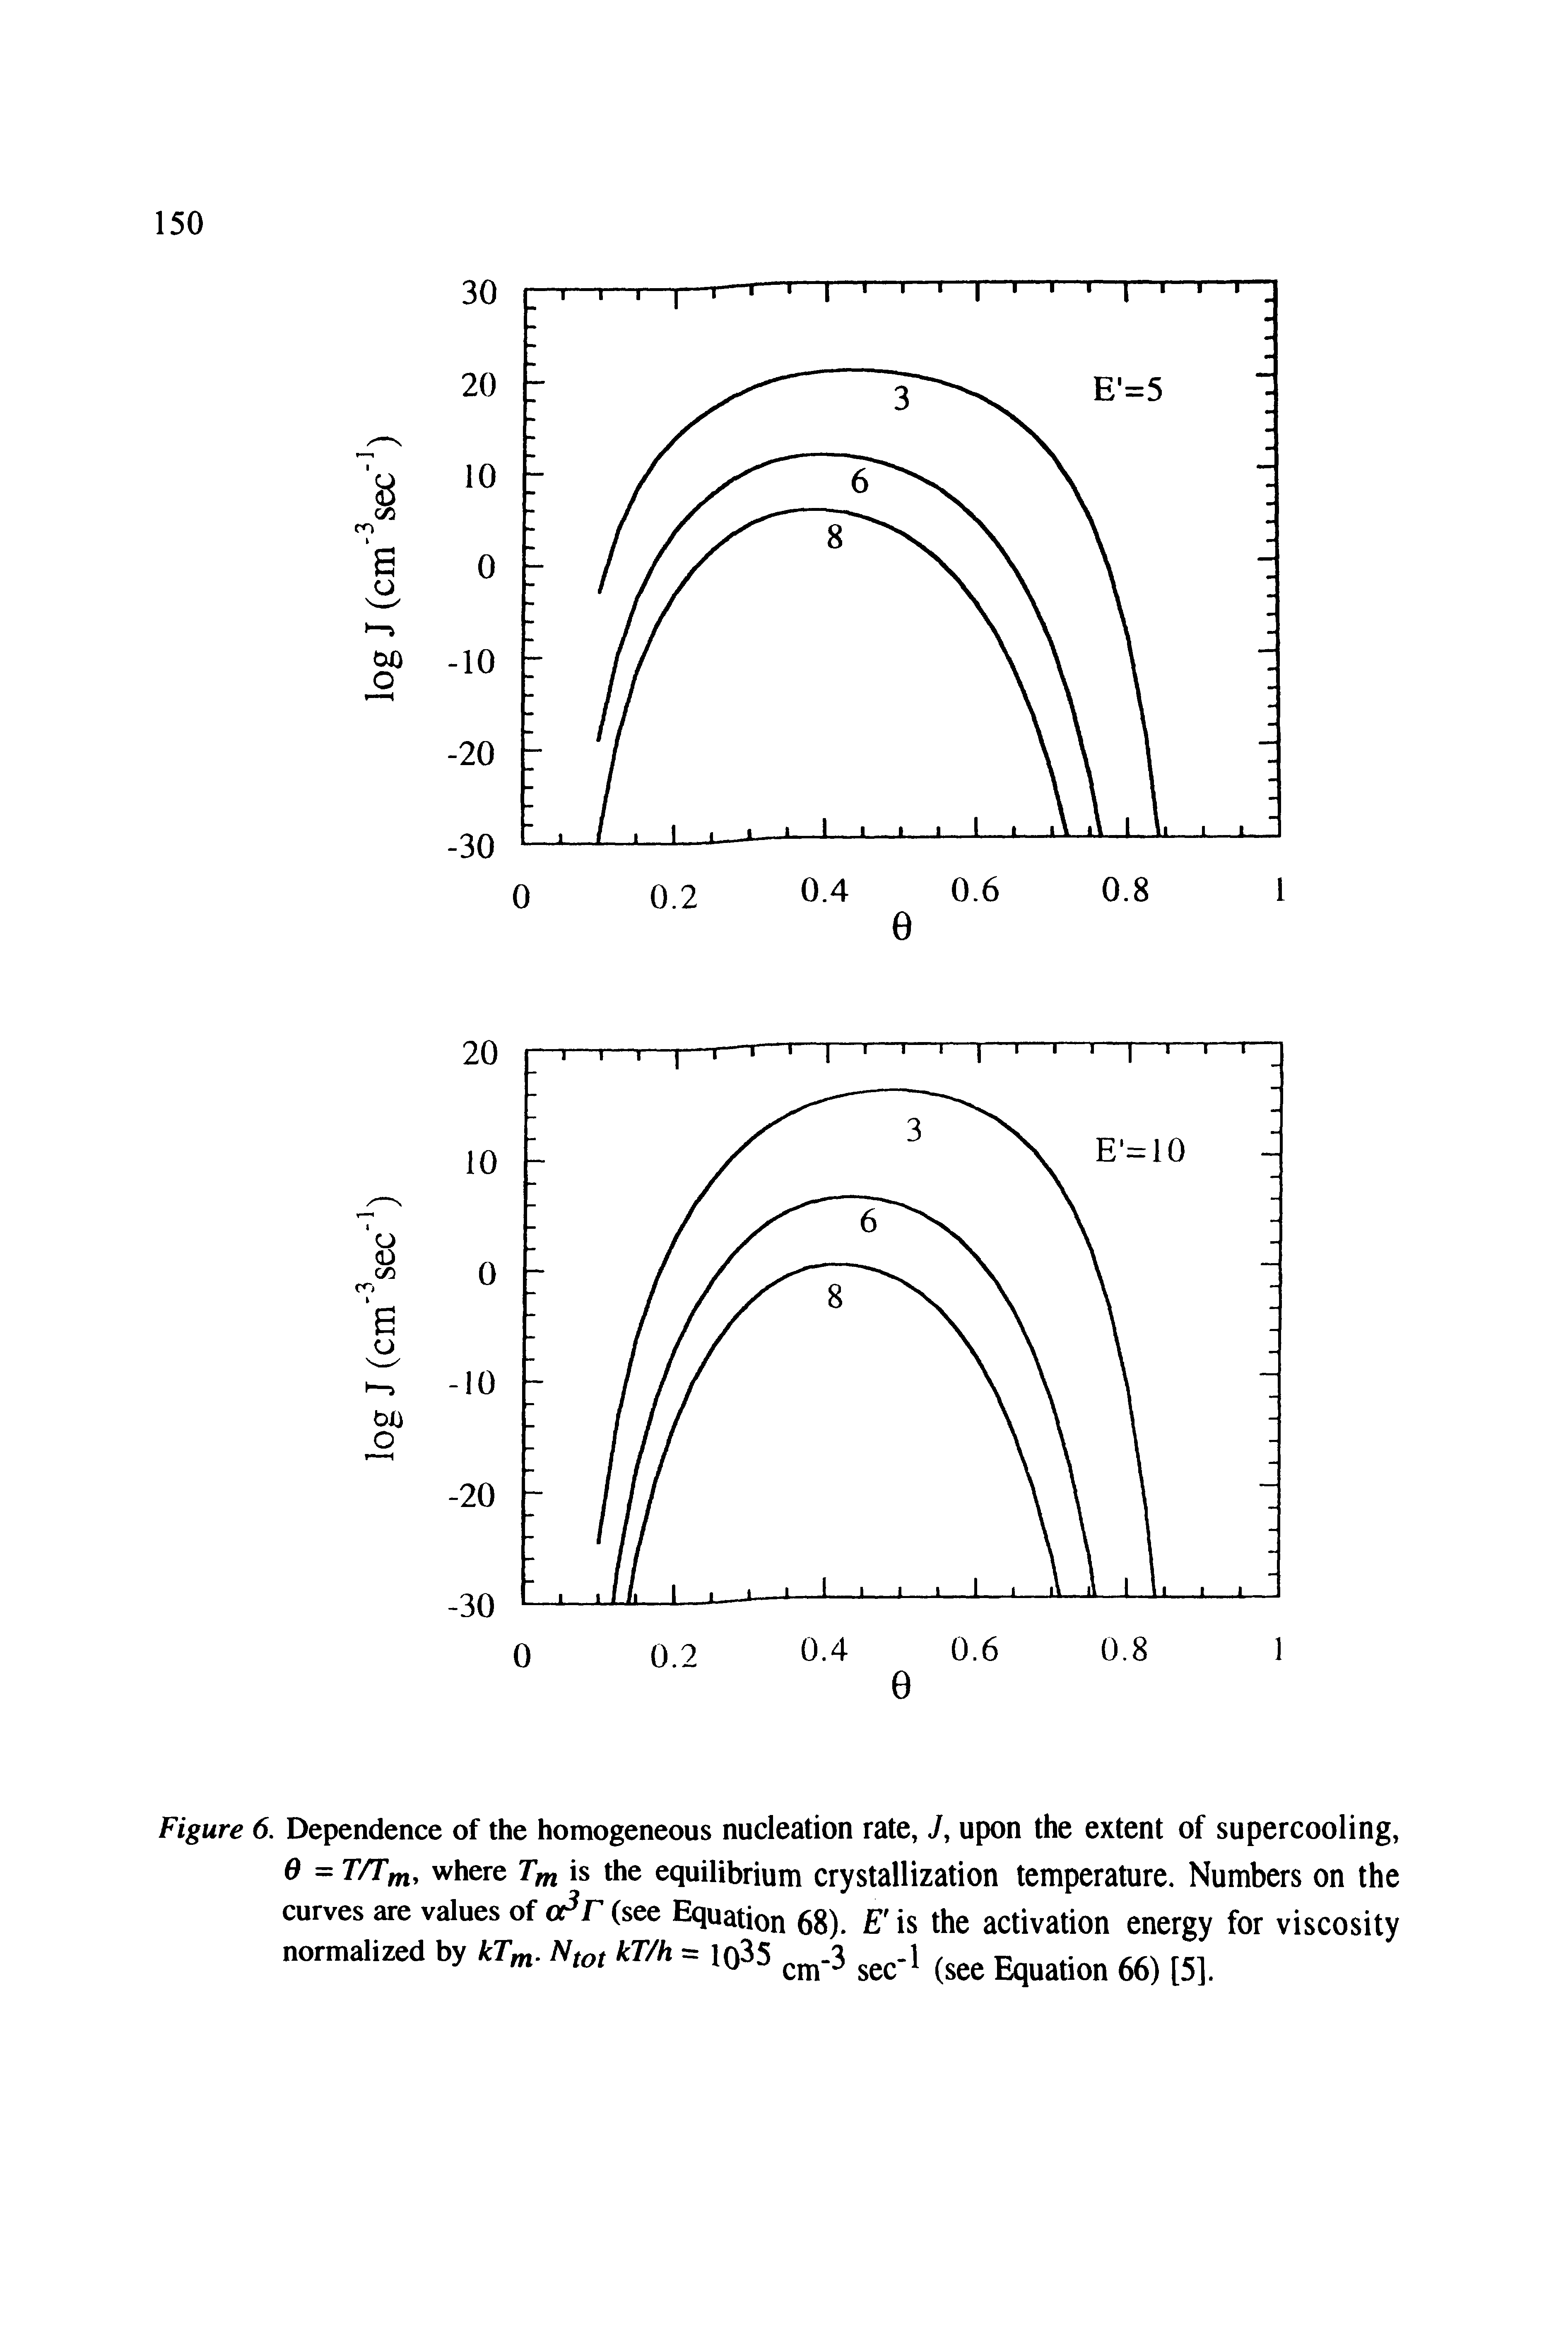 Figure 6. Dependence of the homogeneous nucleation rate, J, upon the extent of supercooling, e = T/Tm, where Tm is the equilibrium crystallization temperature. Numbers on the curves are values of c F (see Equation 68). E is the activation energy for viscosity normalized by kT ,. N,ot kT/h = 1Q35 -3 -1 5 ...